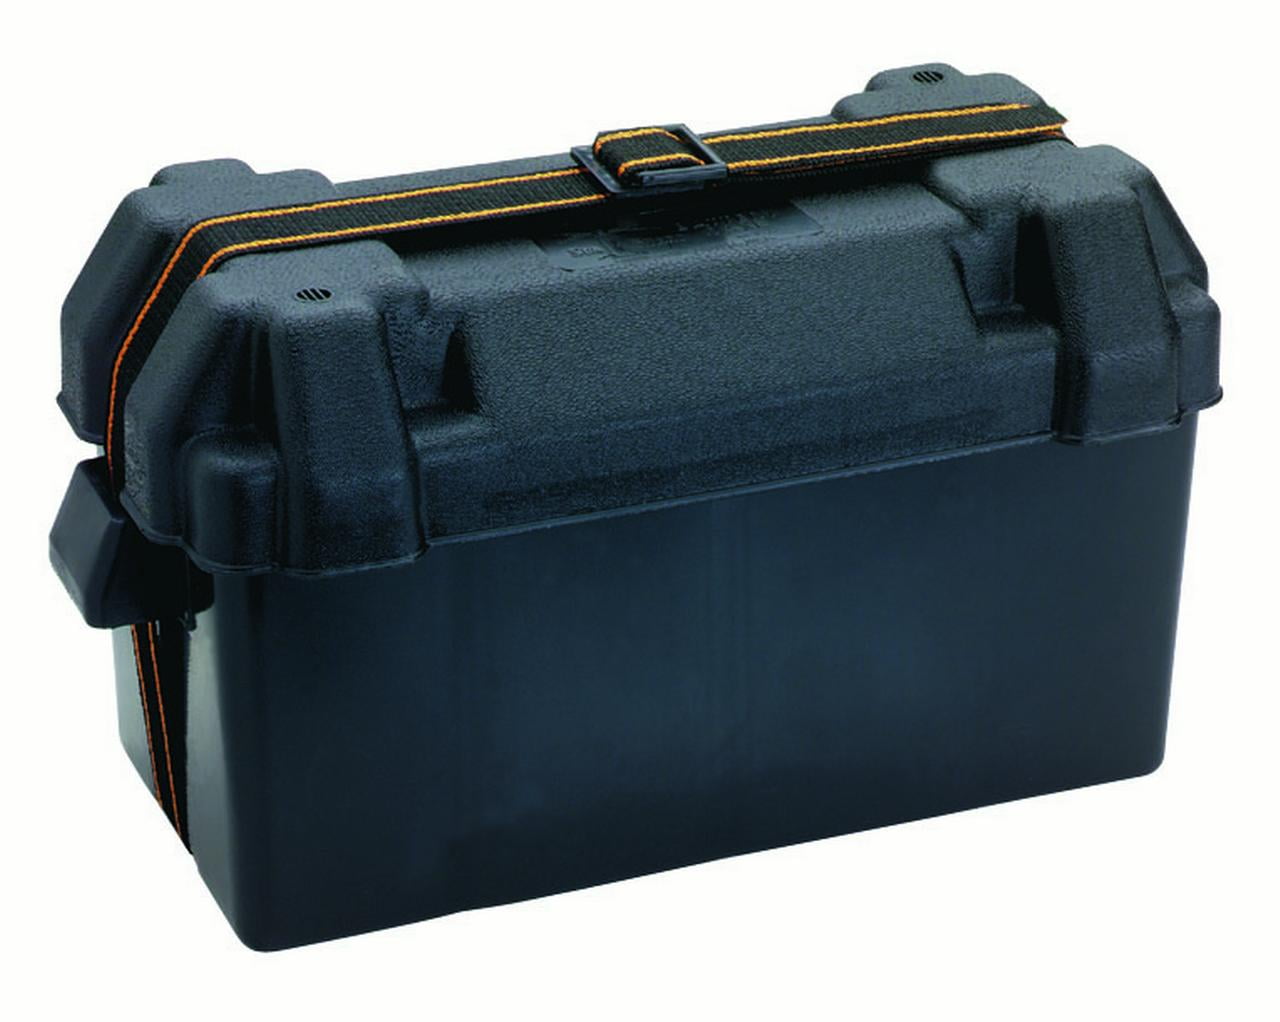 Attwood 9082-1 U1 Small Series 16 Vented Marine Boat Battery Box with  Mounting Kit and Strap, Black 